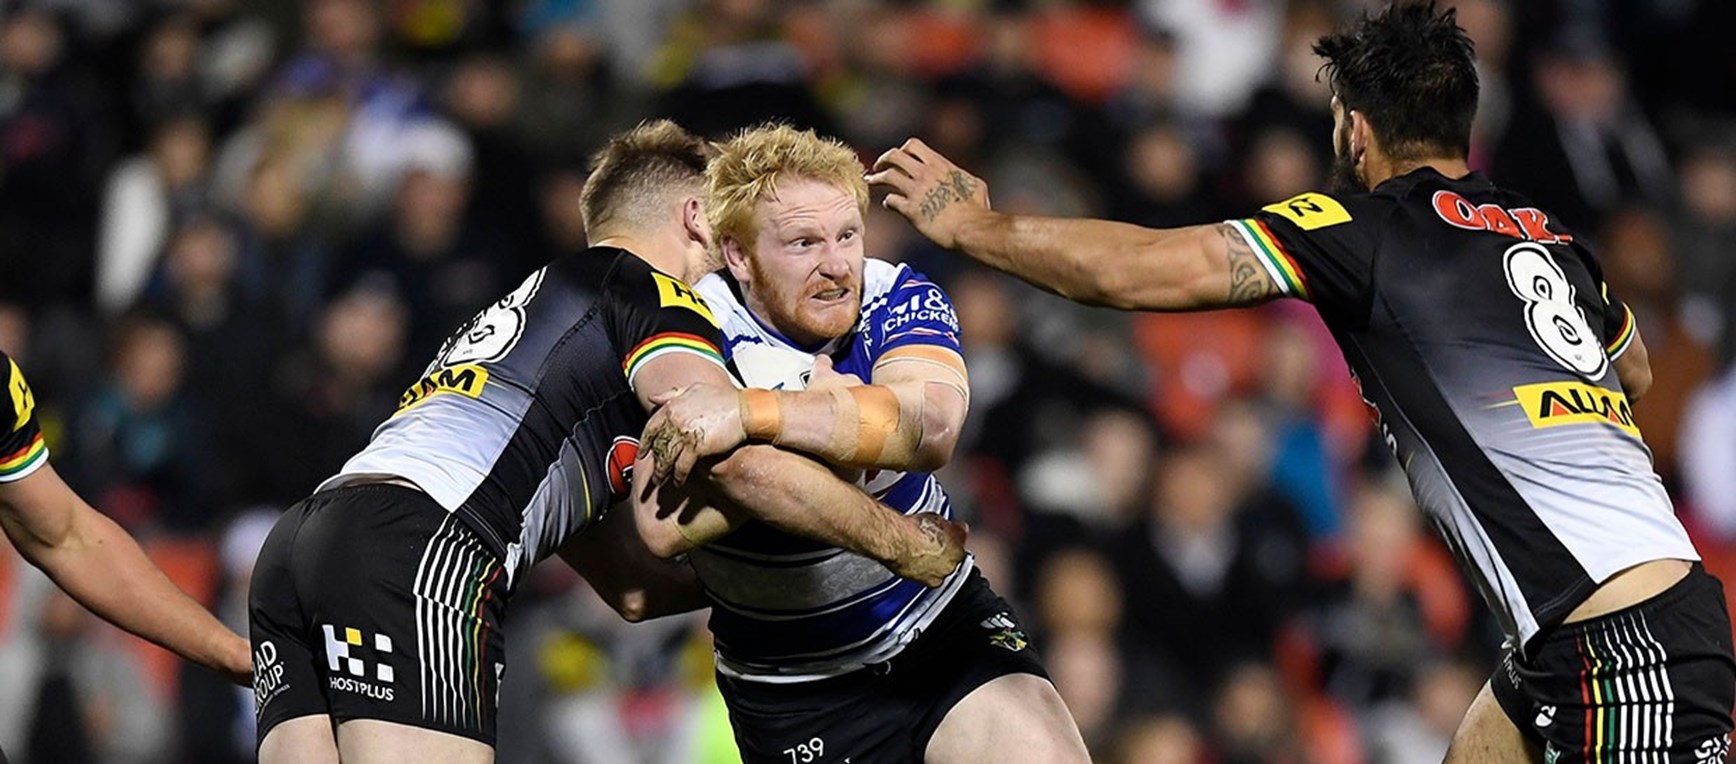 GALLERY: Round 21 v Panthers